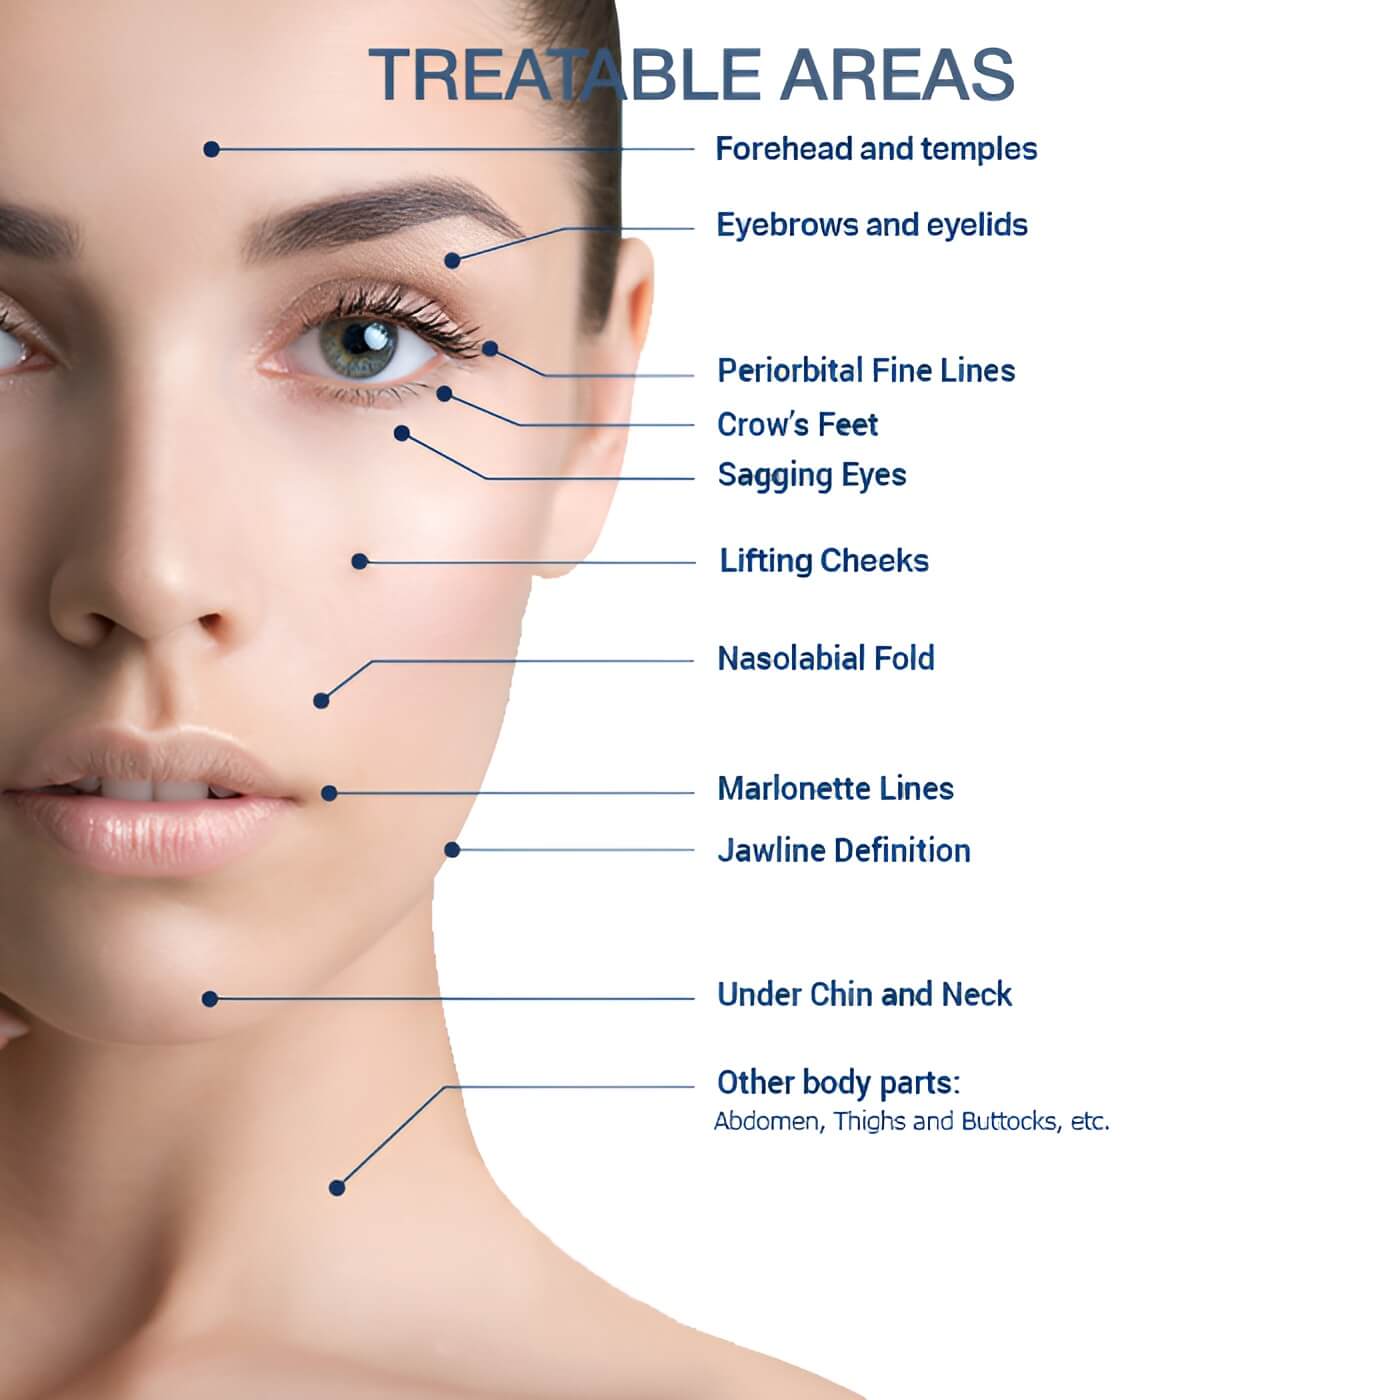 treatable areas RF face lifting salon Toujours Belle